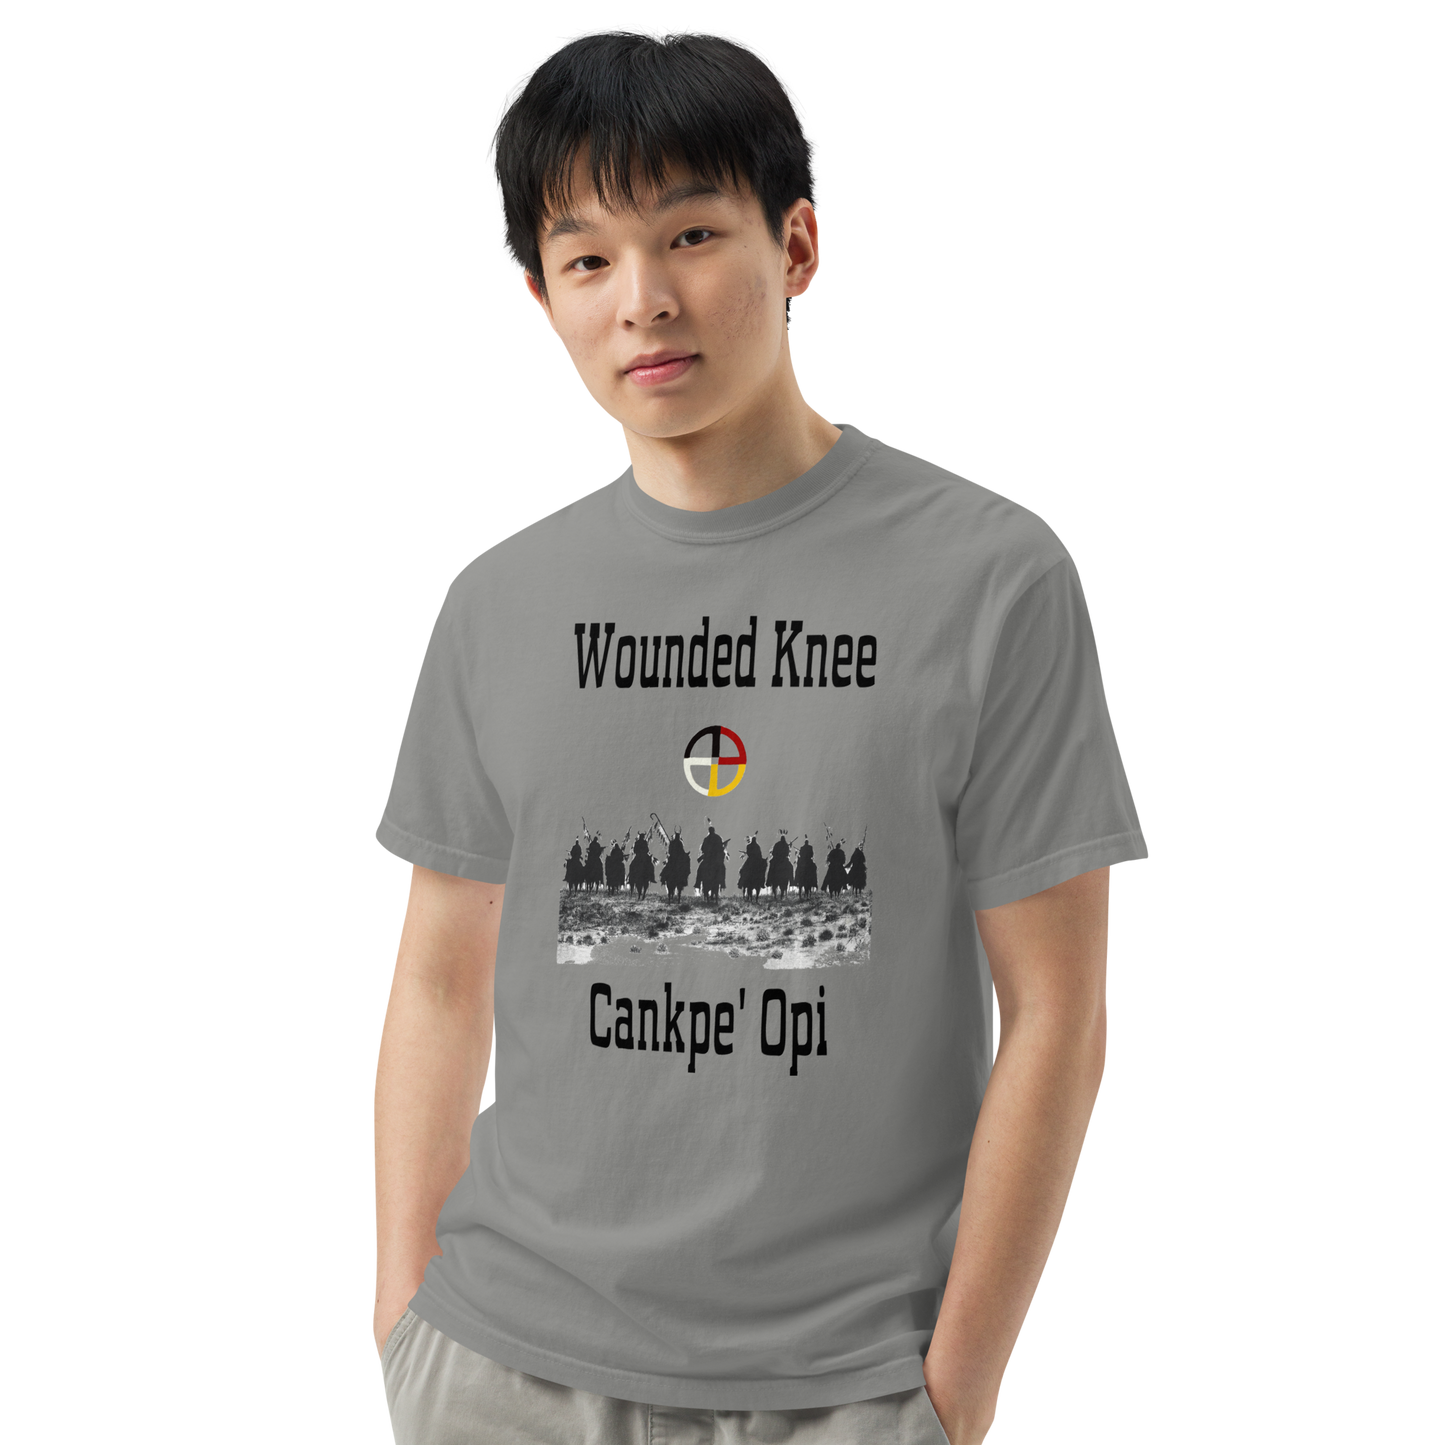 Wounded Knee Men’s garment-dyed heavyweight t-shirt